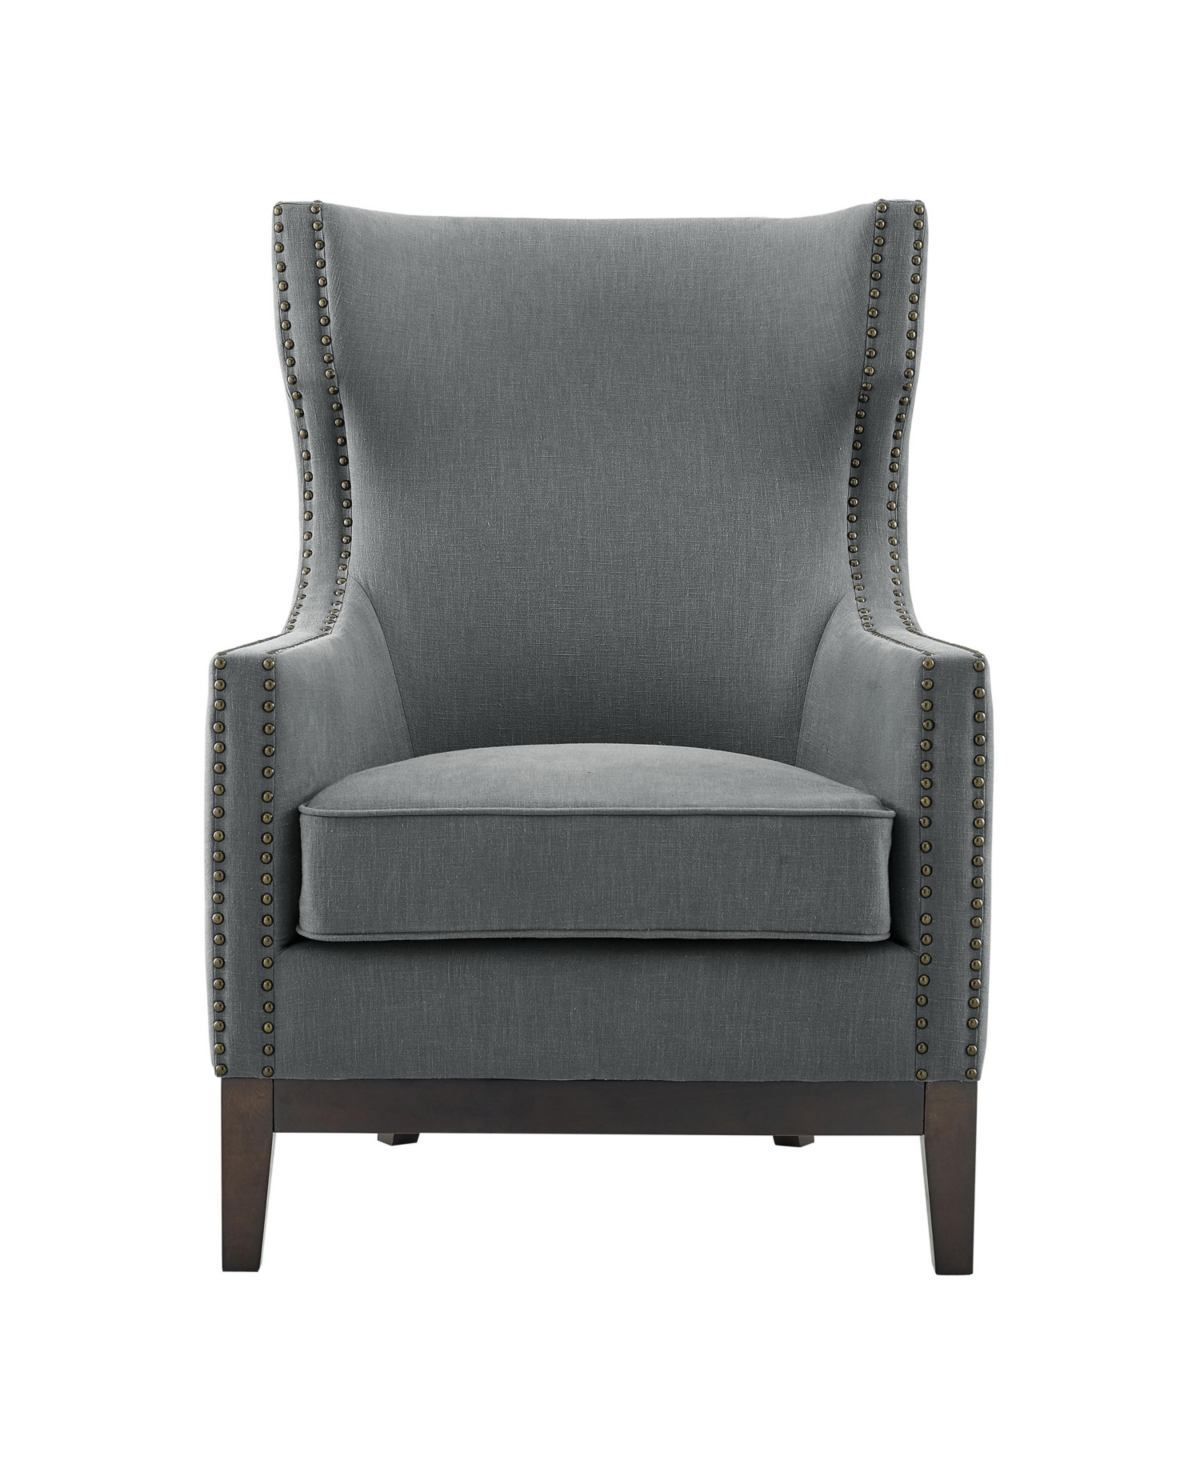 Steve Silver Roswell 29" Linen Accent Chair In Medium Gray